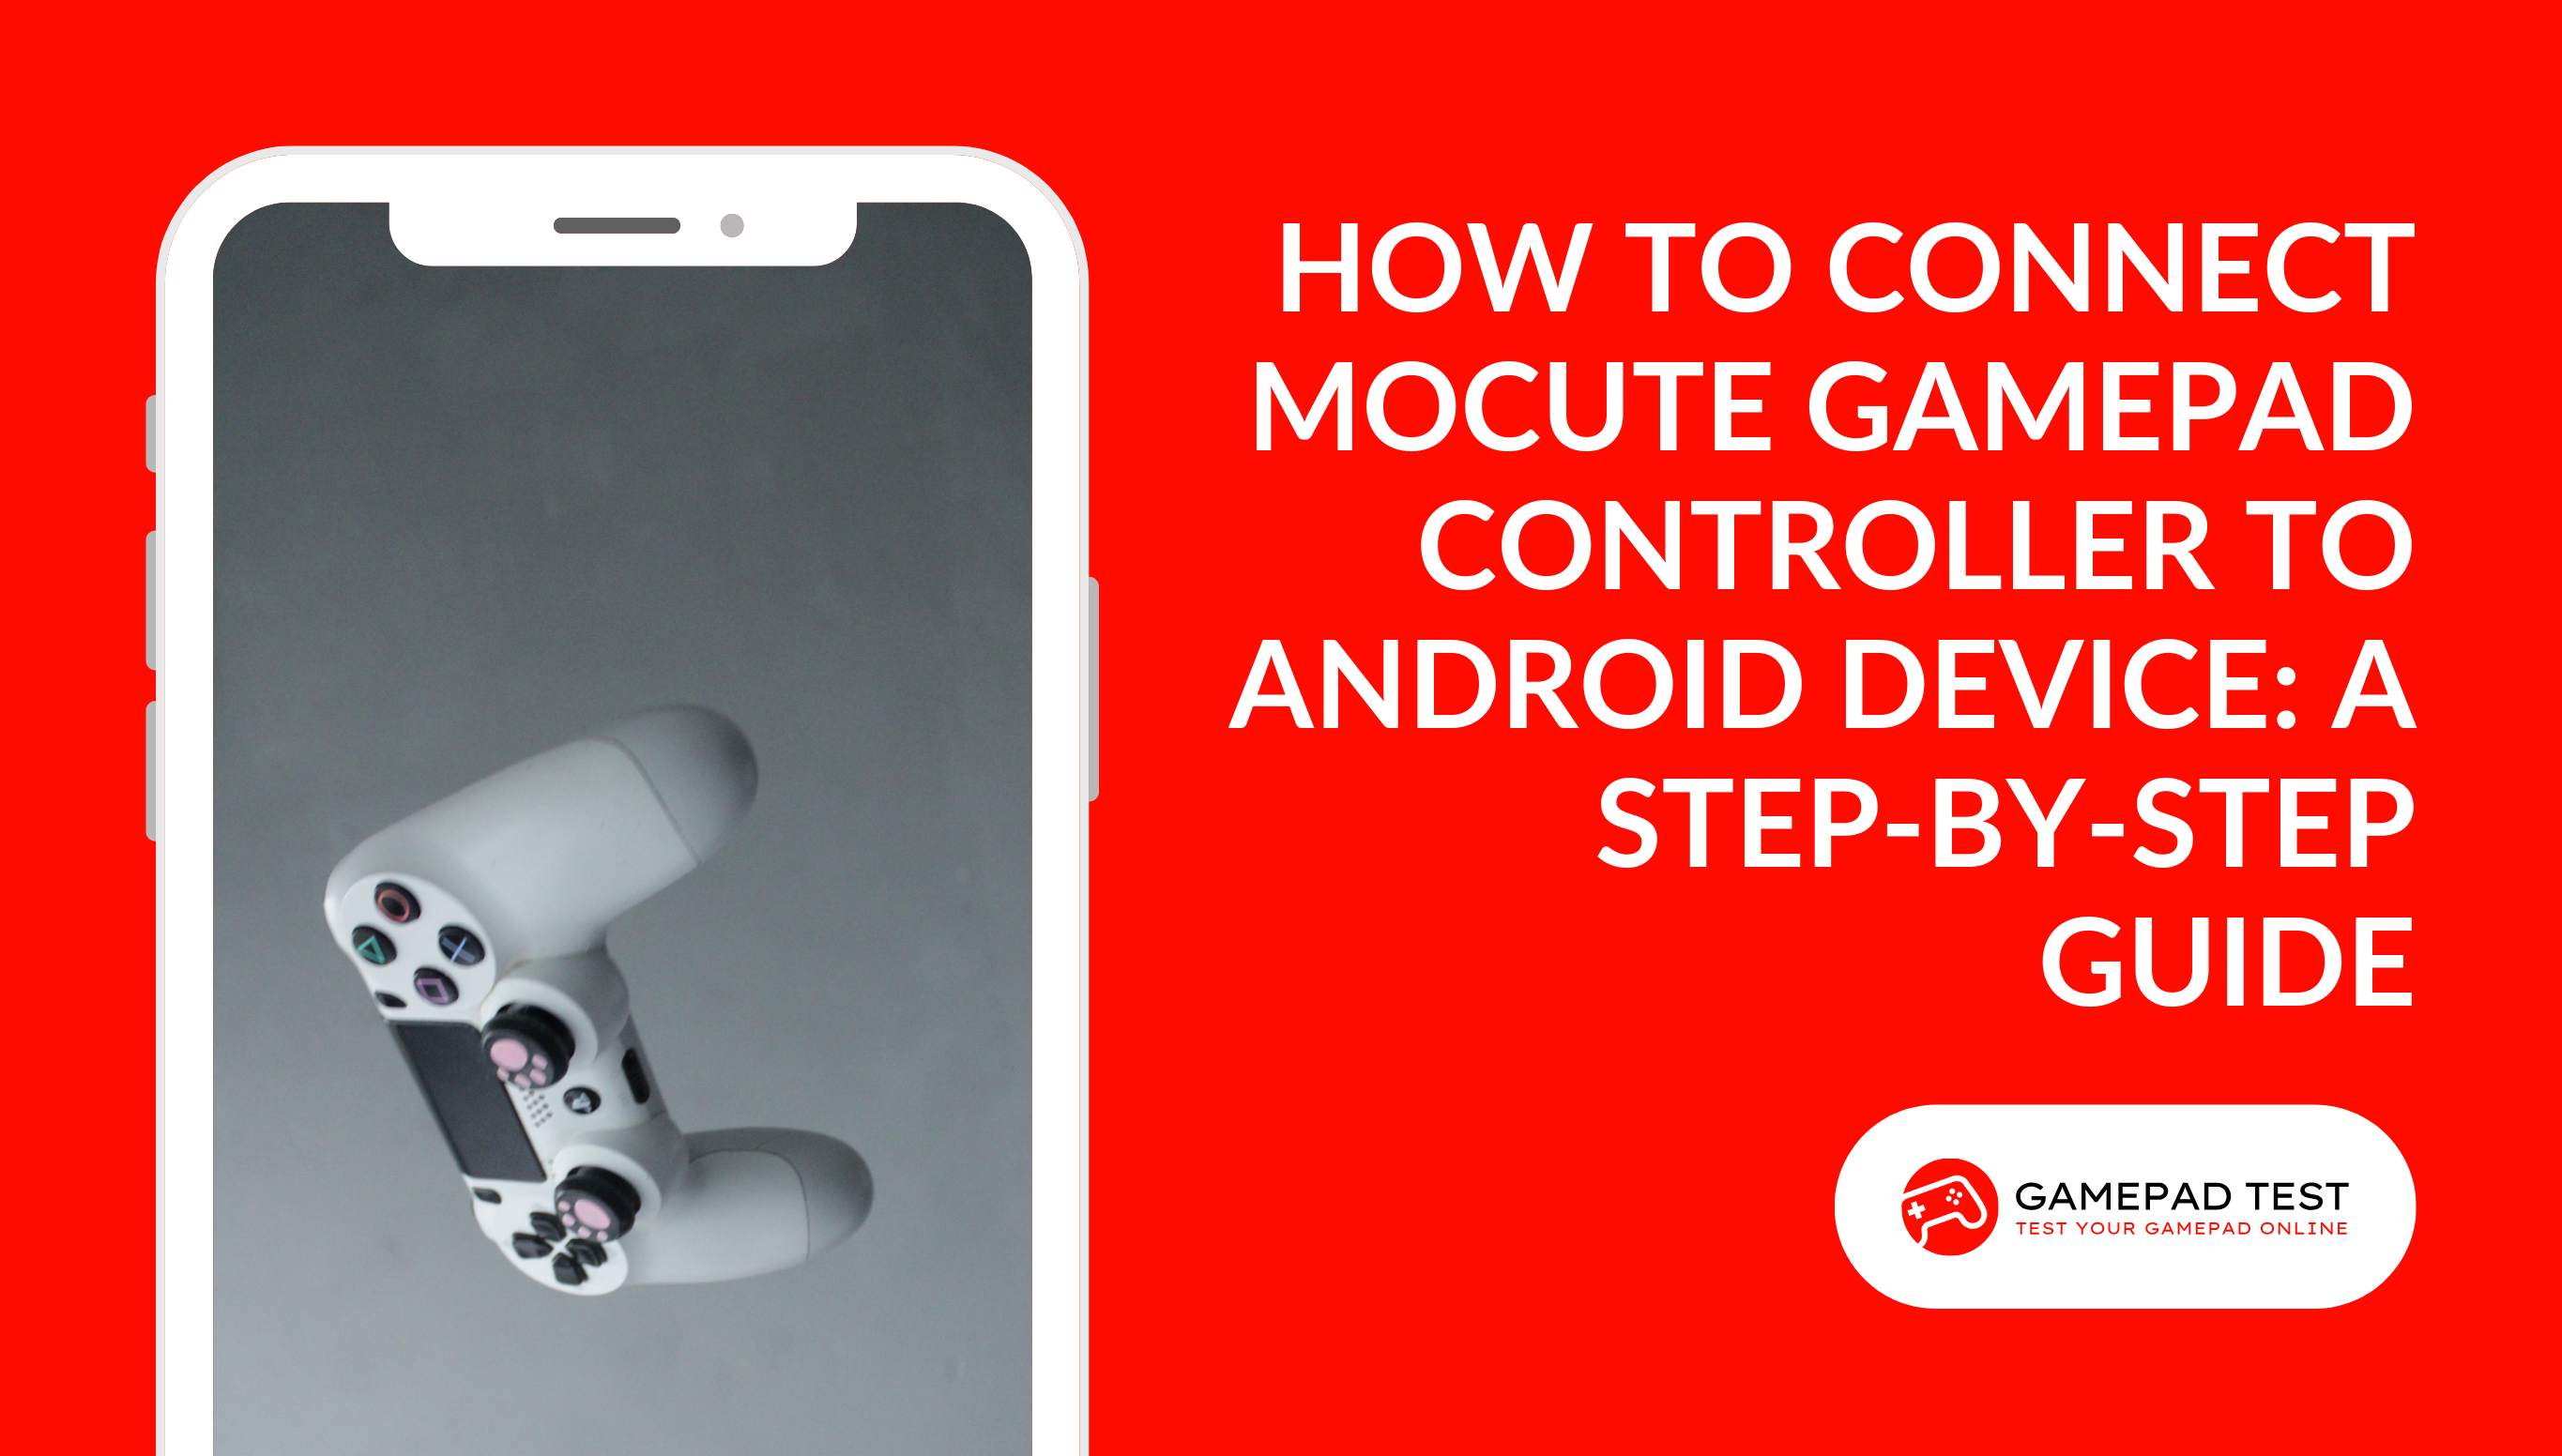 How to Connect Mocute Gamepad Controller to Android Device A Step-by-Step Guide - Featured Image